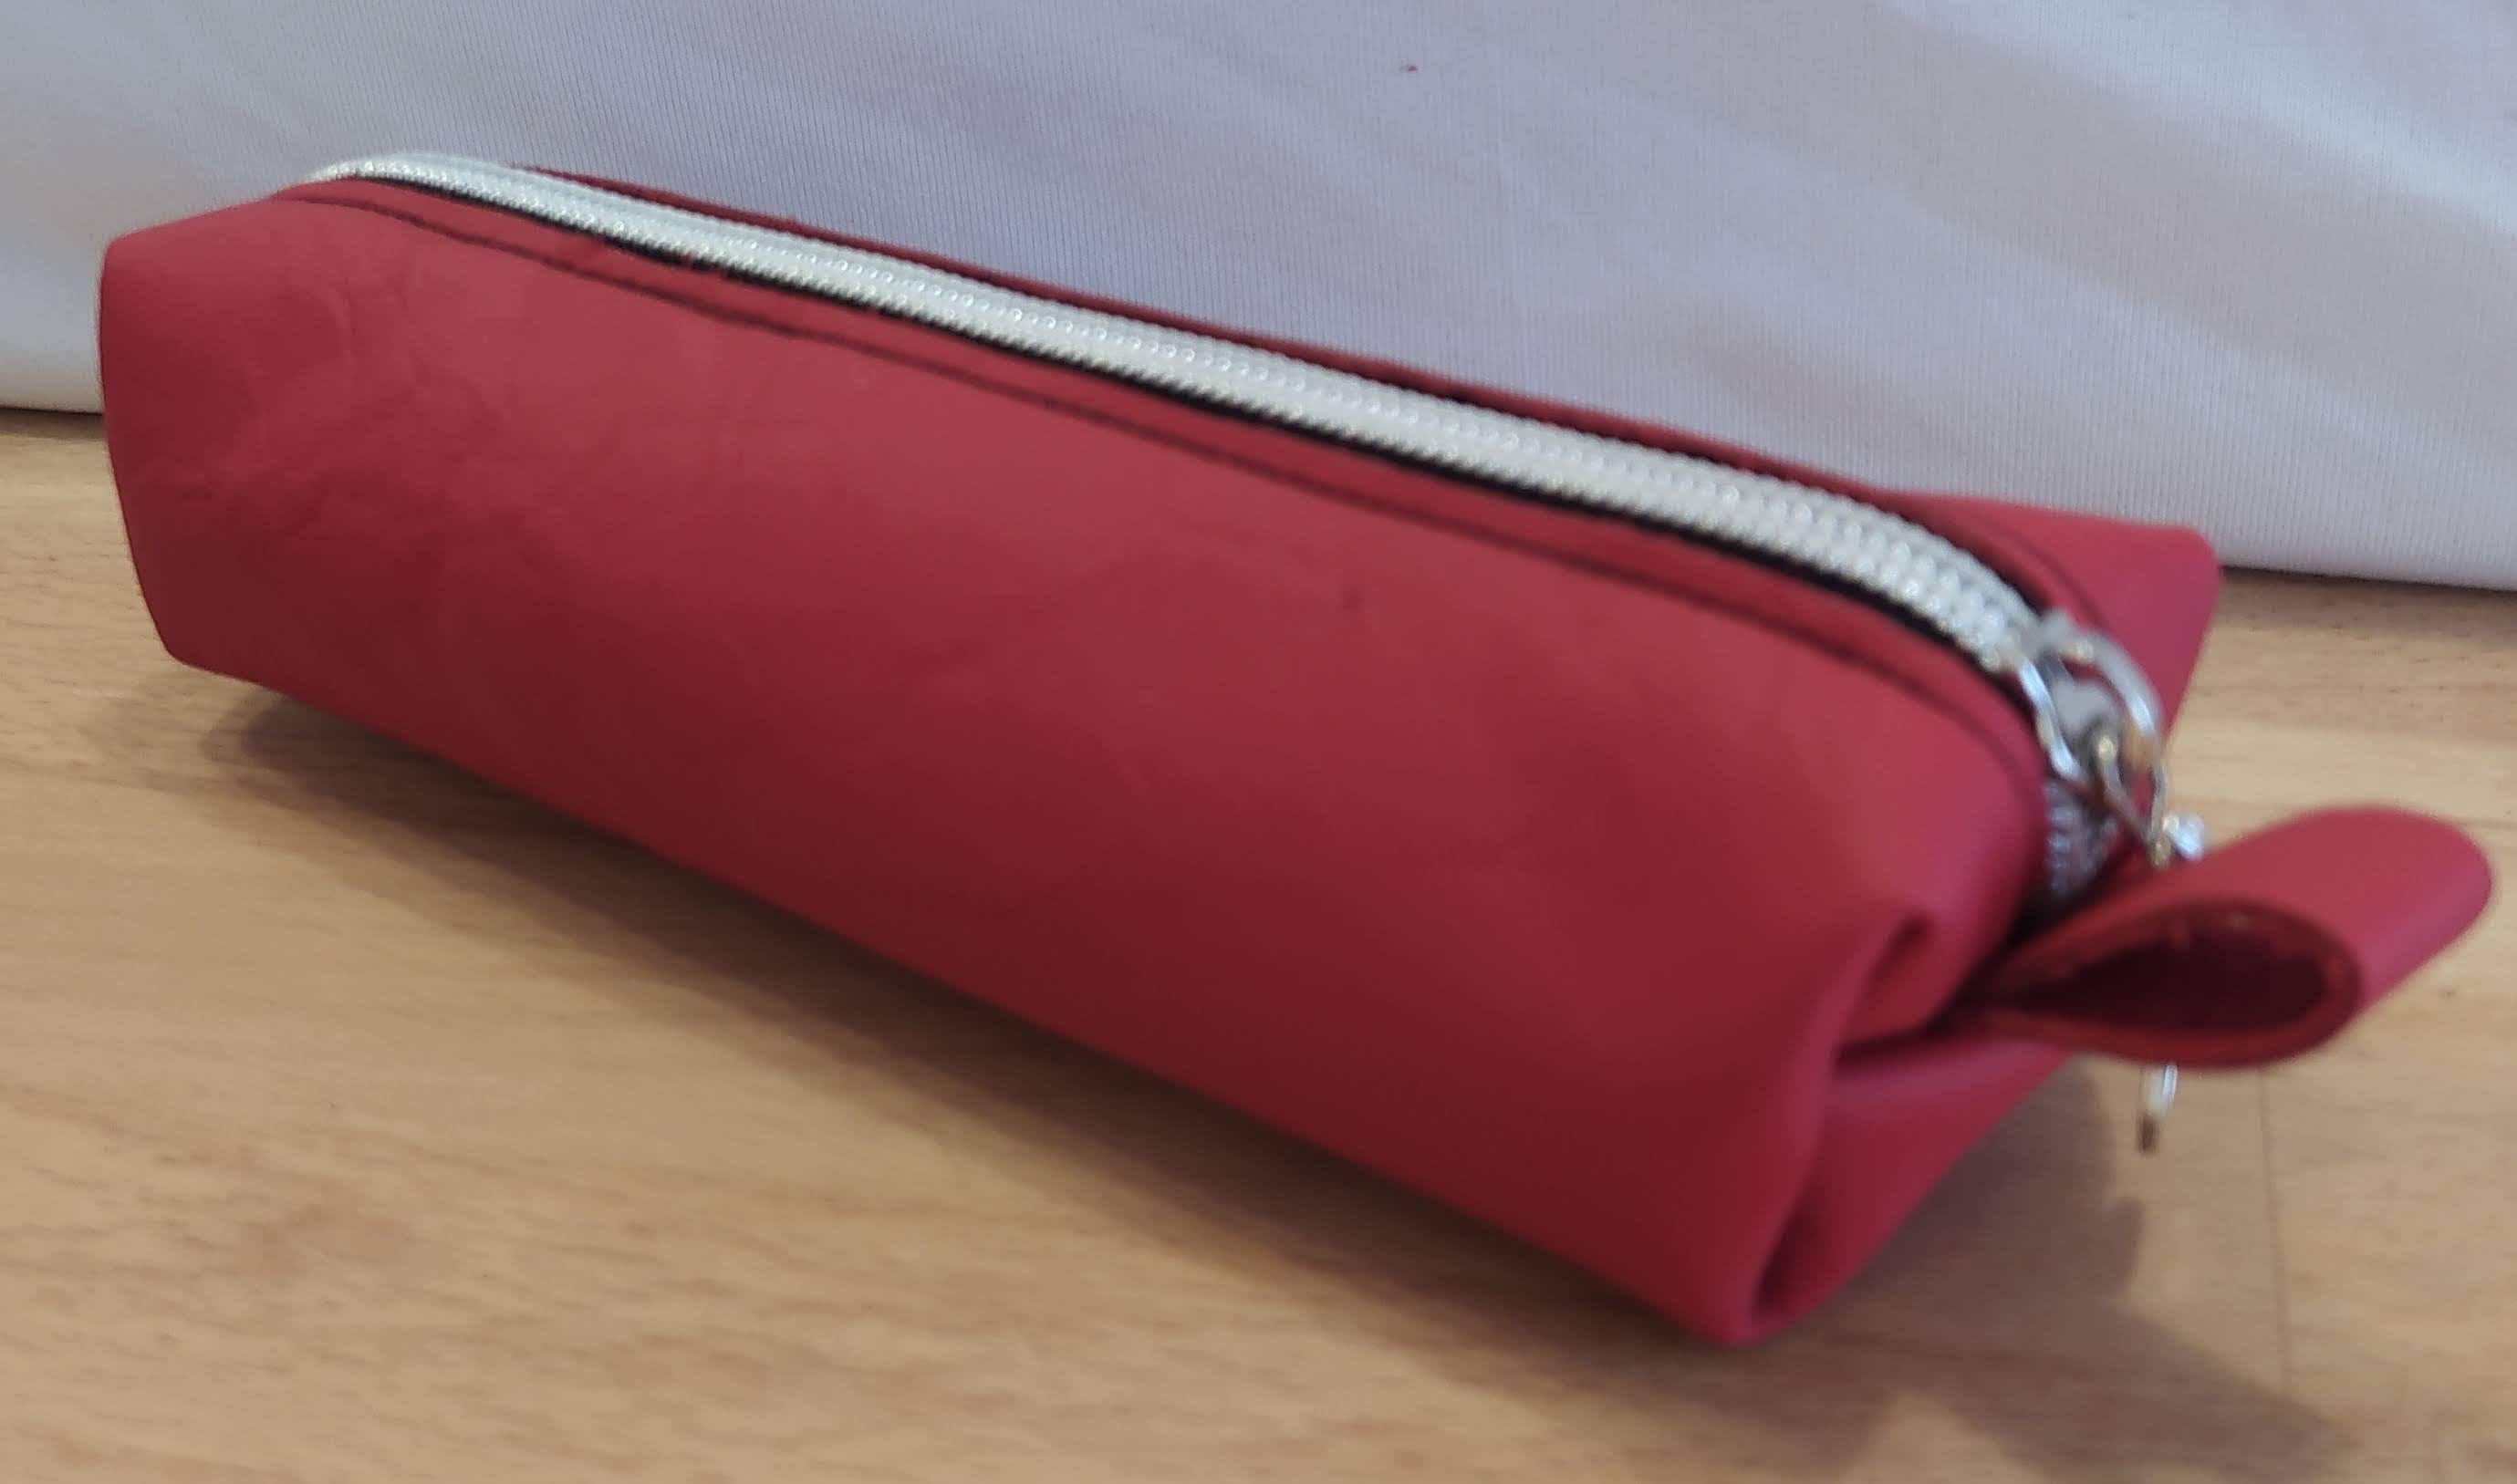 Pen Case, Pencil Case, Pencil Case, Pencil Case, Real Leather, Red